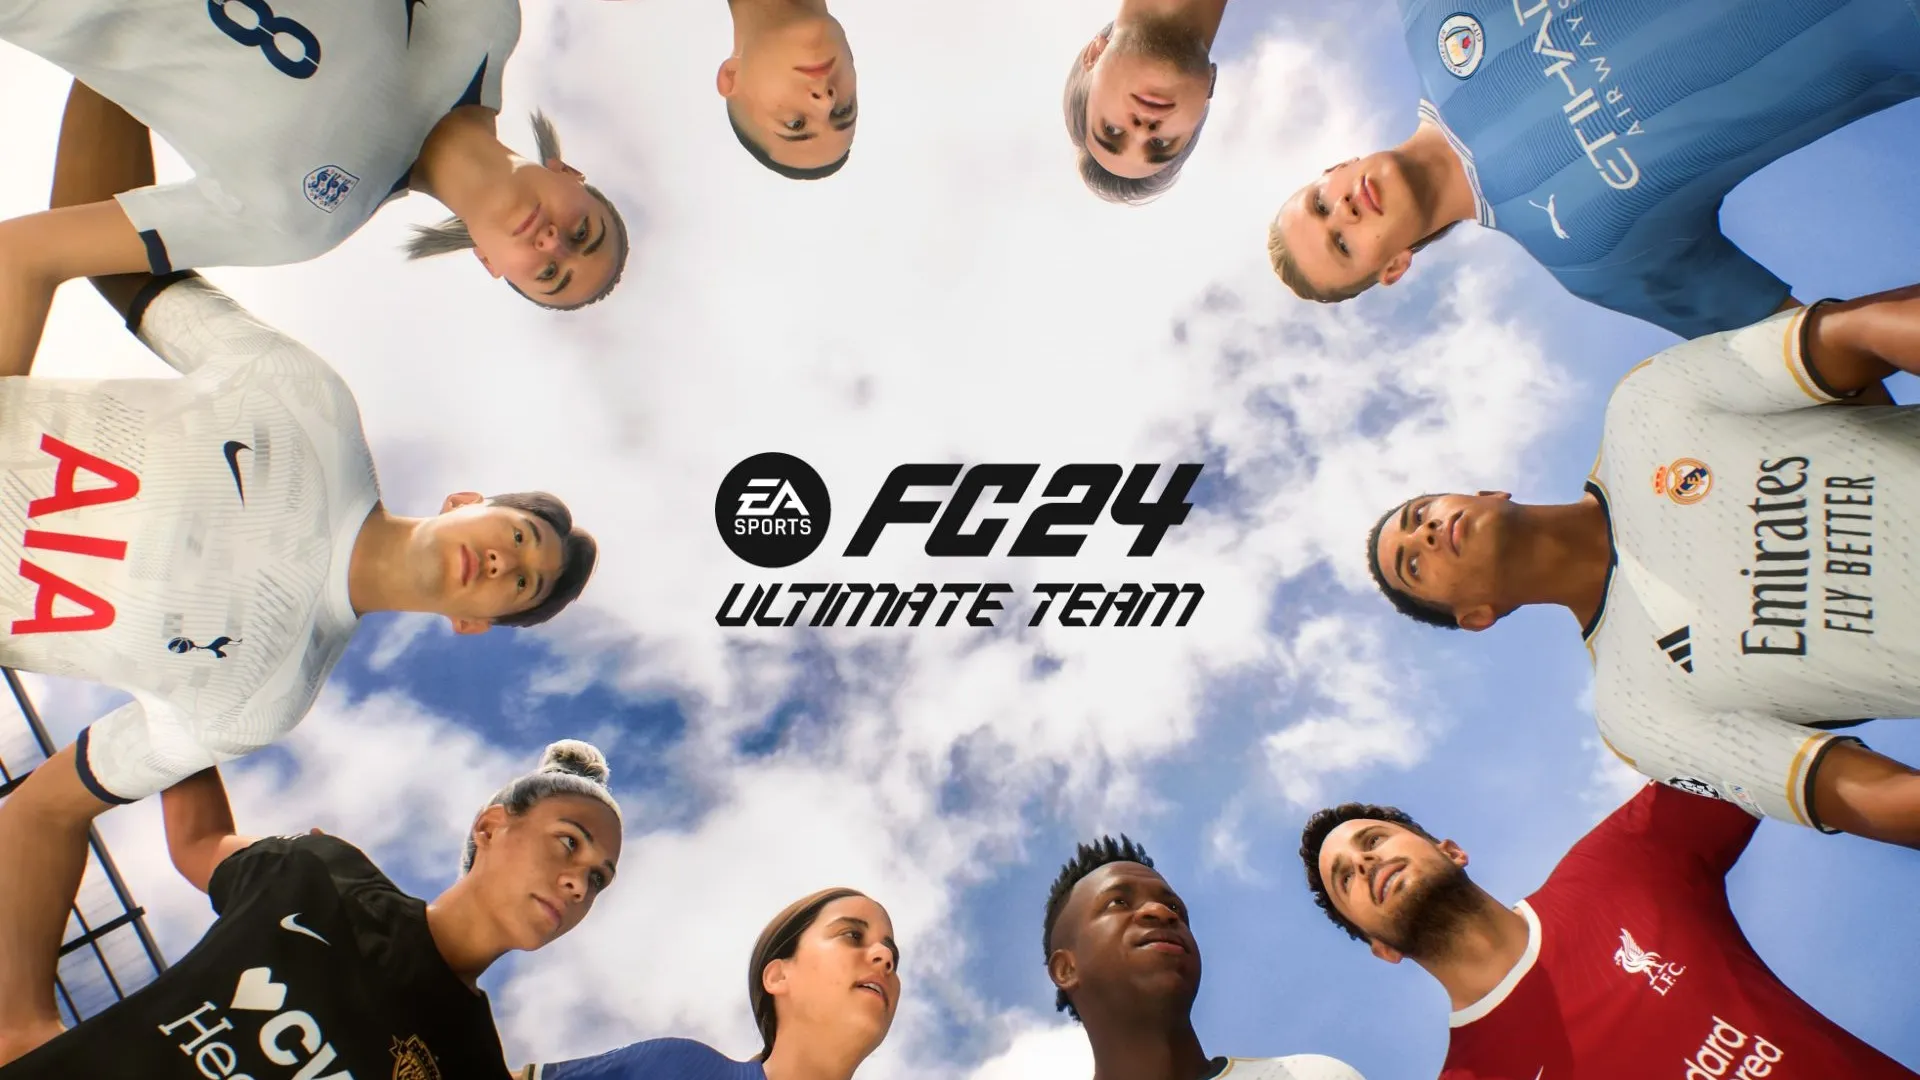 How To Play EA SPORTS FC 24 Early RIGHT NOW 